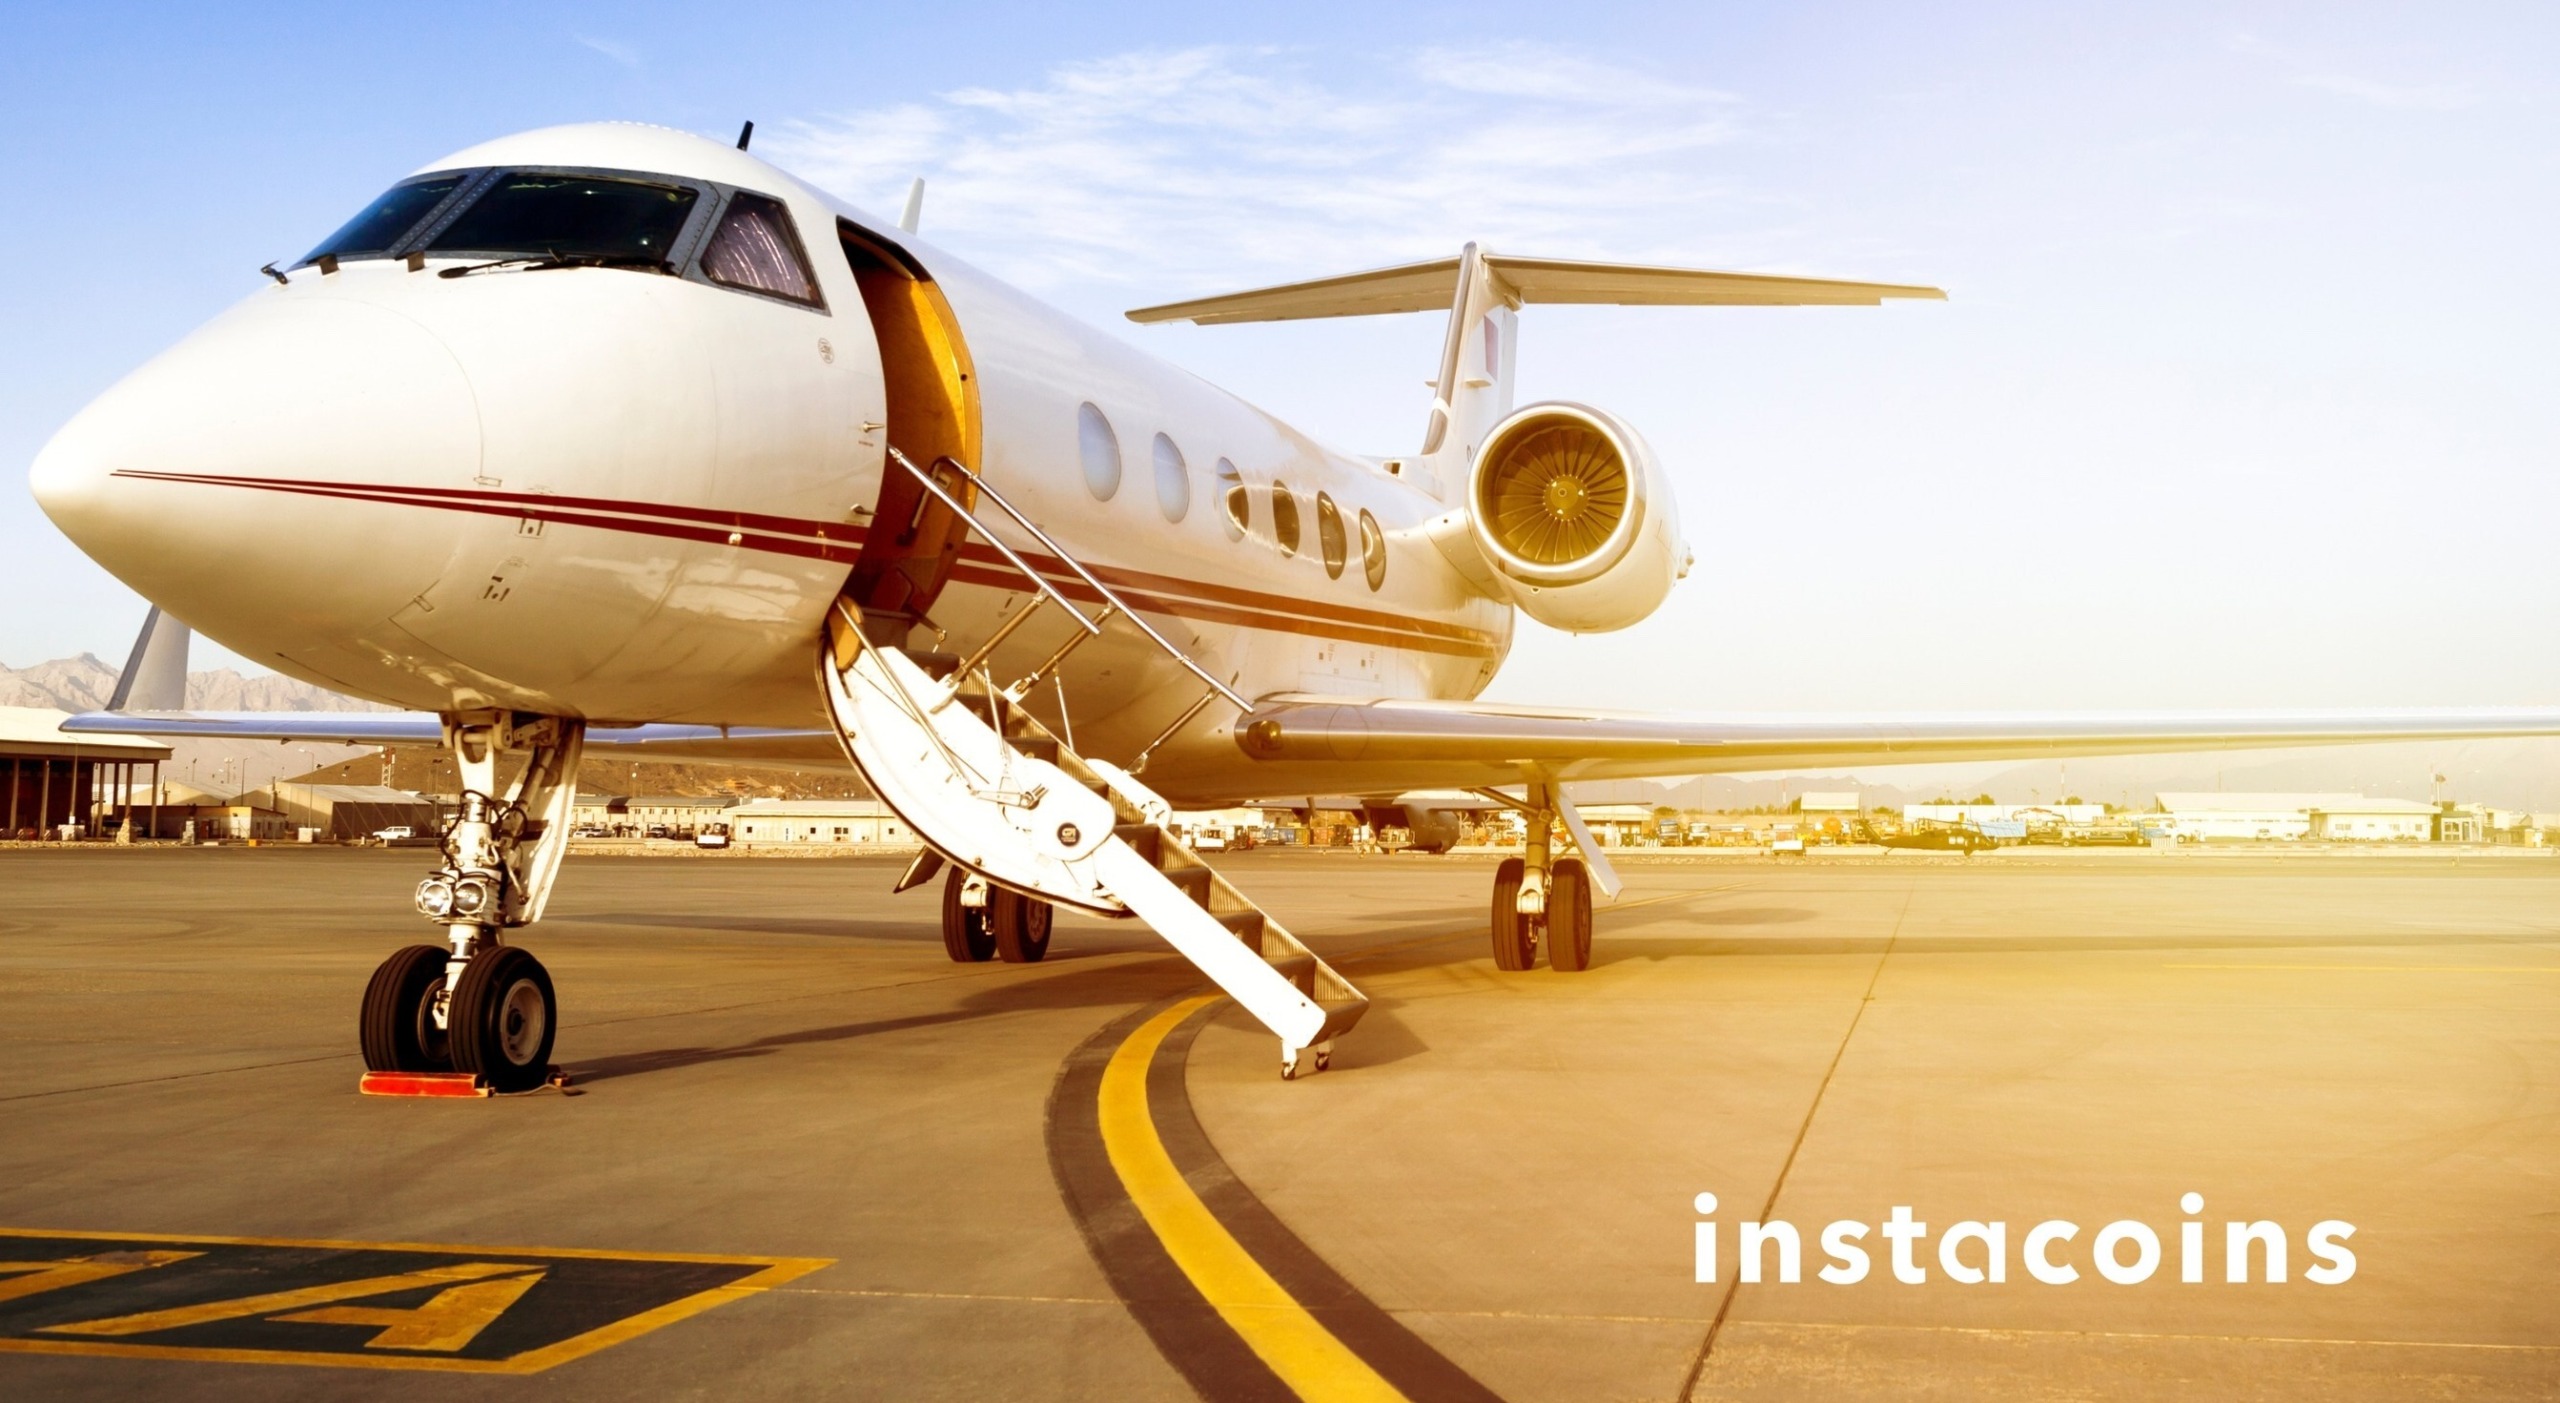 Crypto payments via Instacoins fuel revenue growth for Sandbank Jets